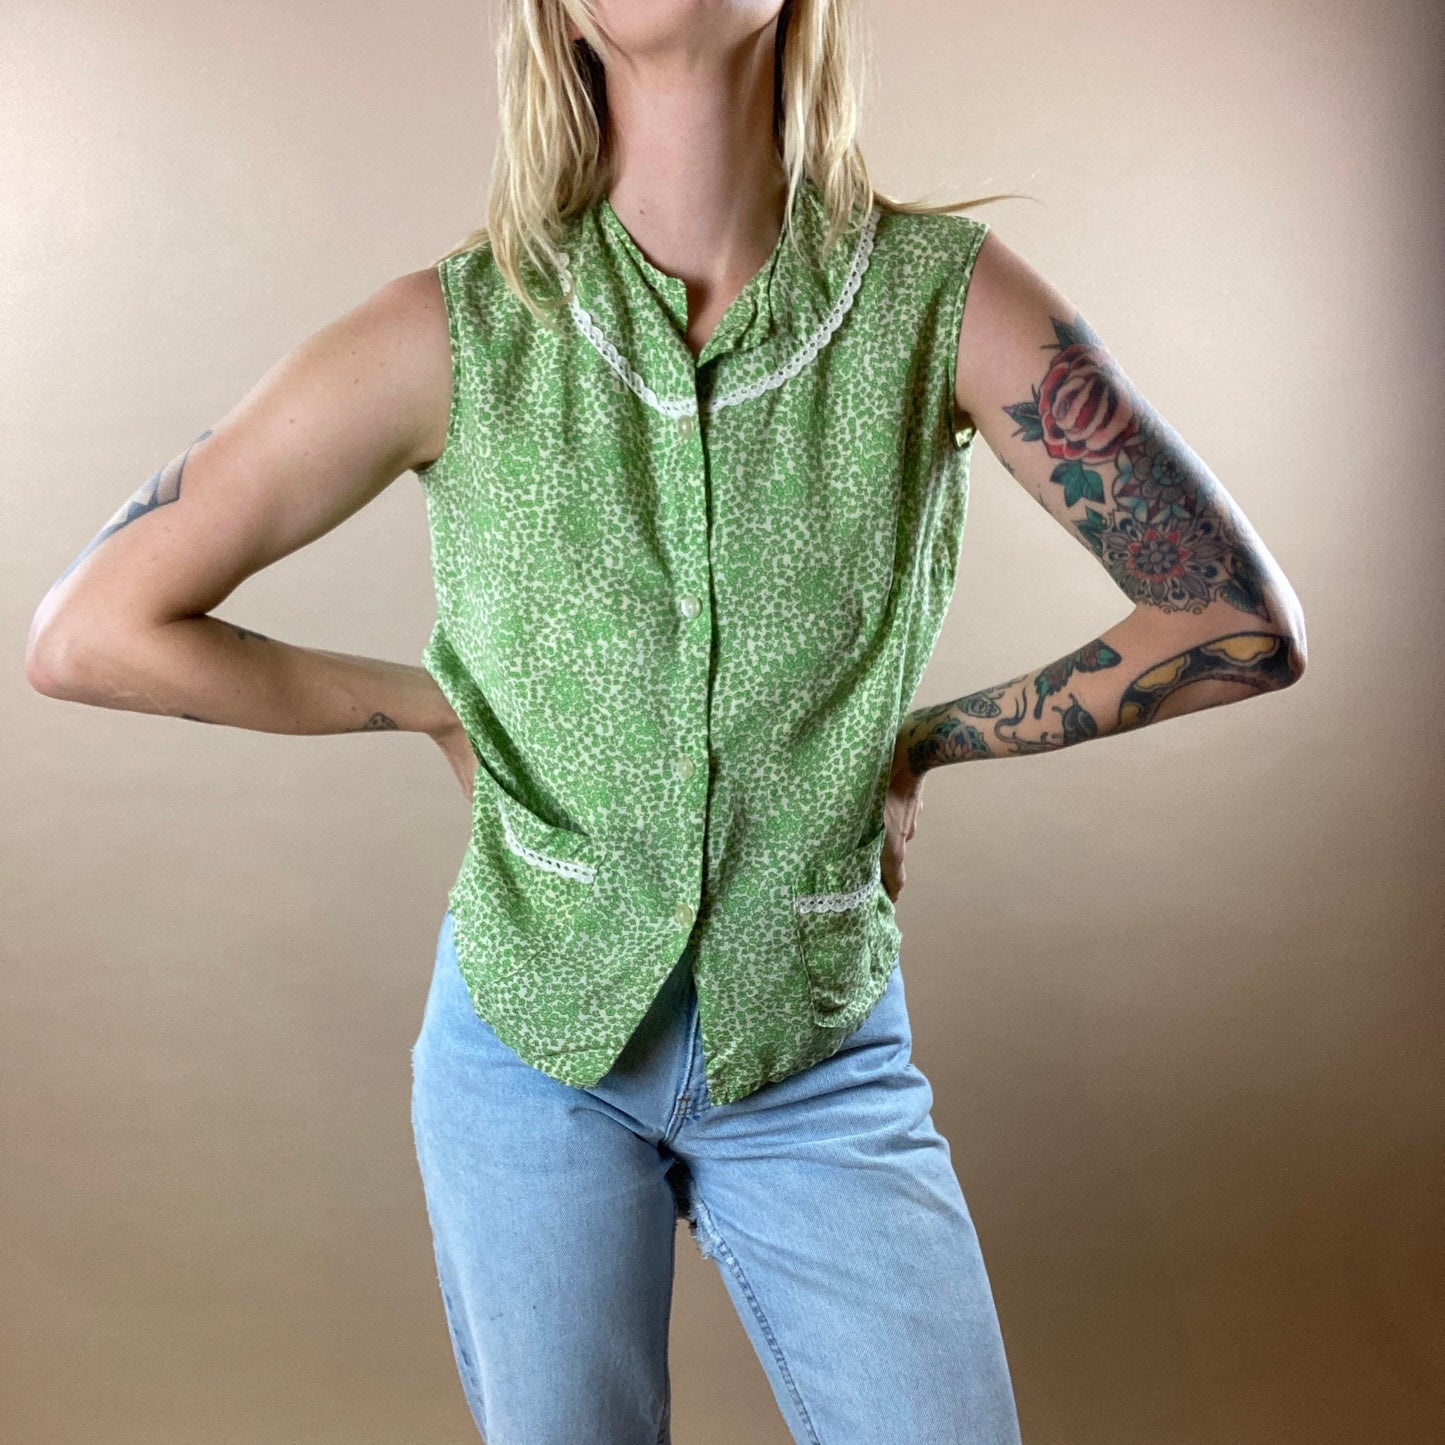 70s Green Cotton Button Up Blouse w/ Lace Details / Small